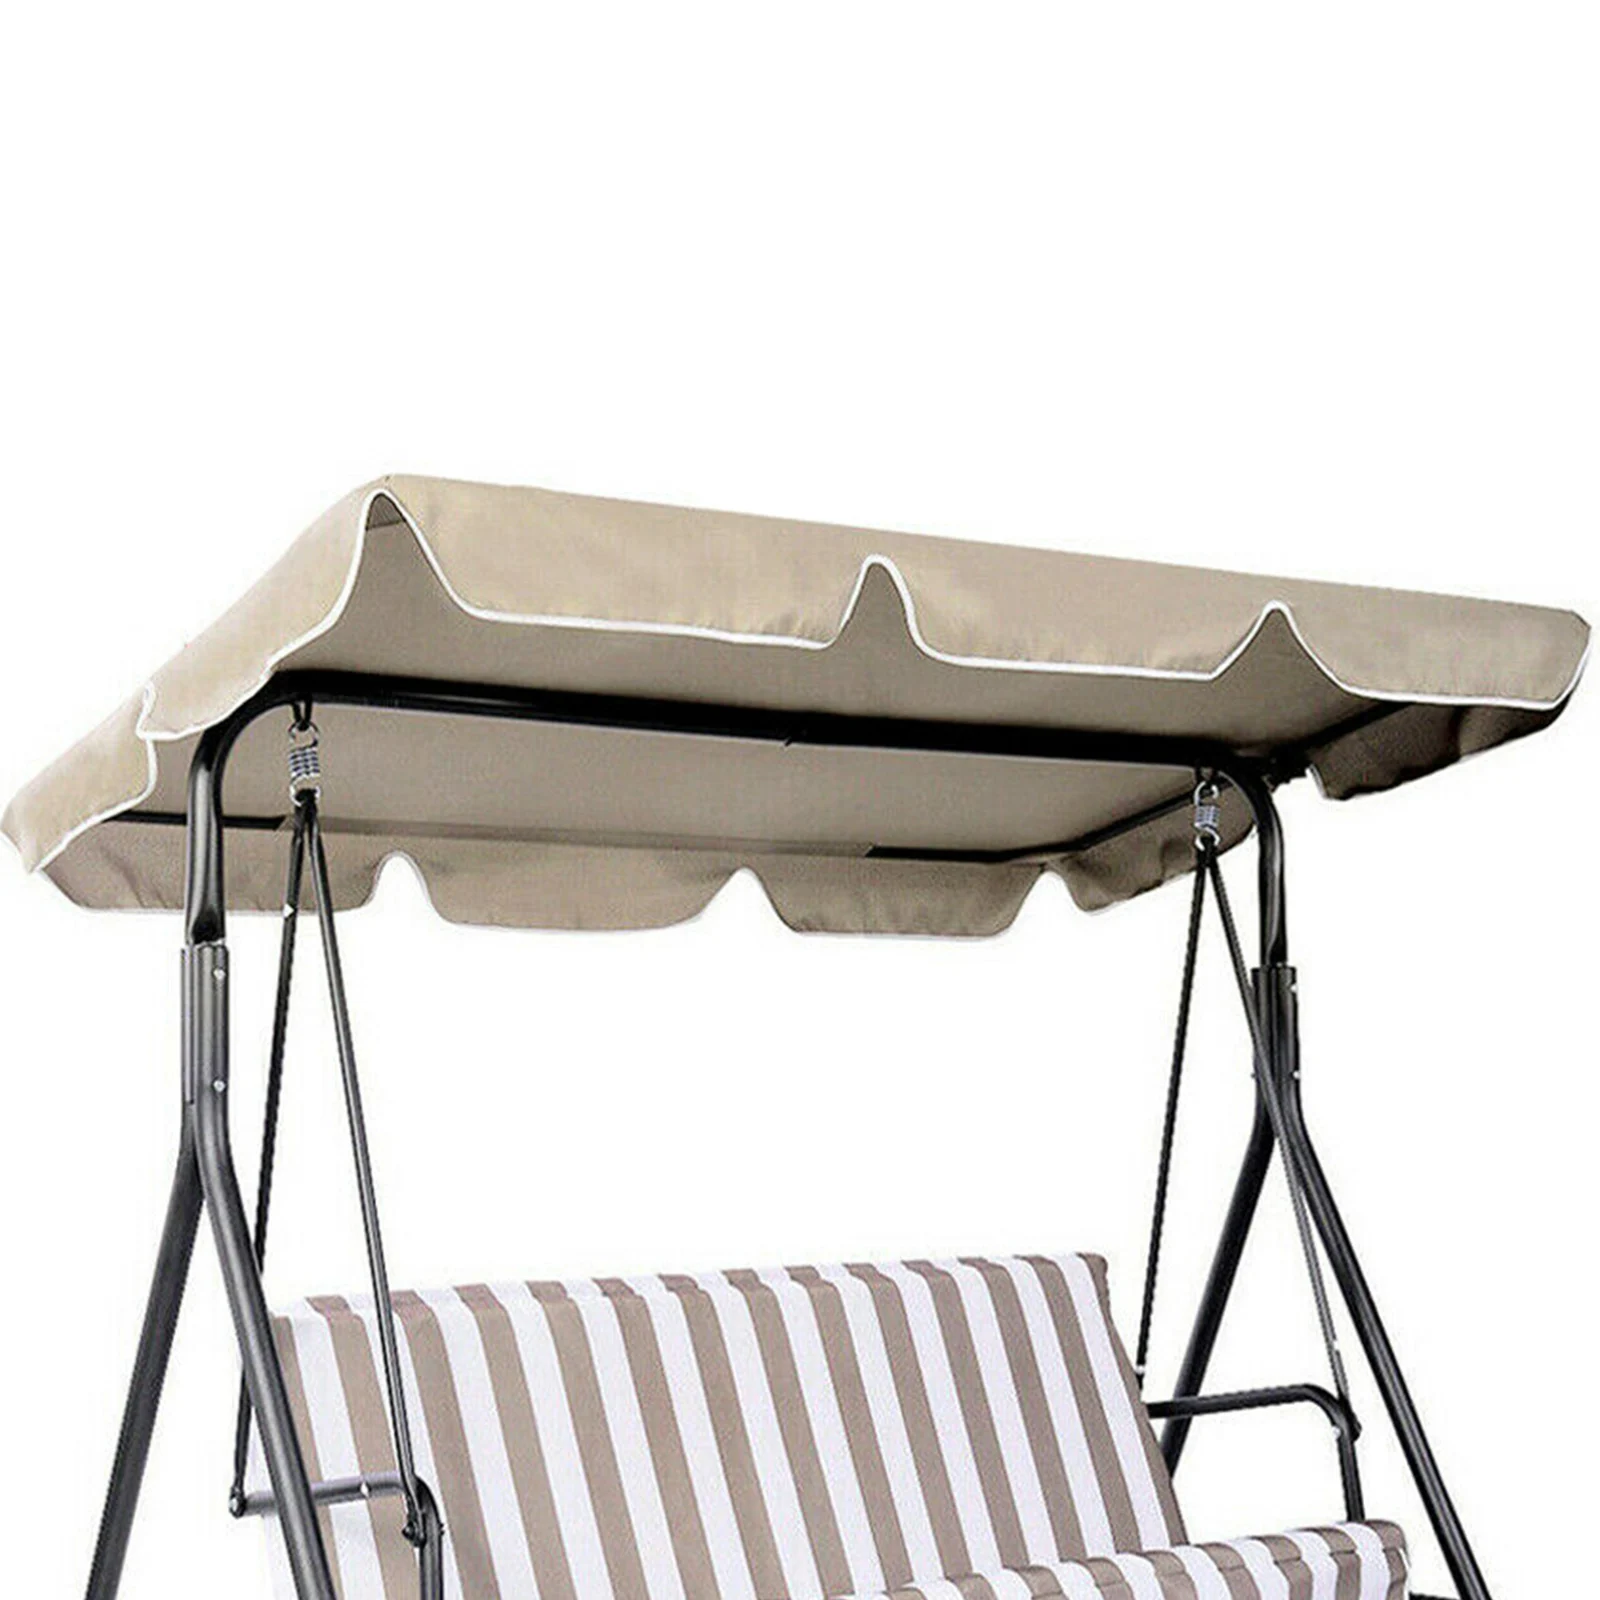 Patio Swing Cushion Top Cover Replacement Swing Top Awning for 3 Seater Swing Chairs, Outside Yard Home Furniture Accessories